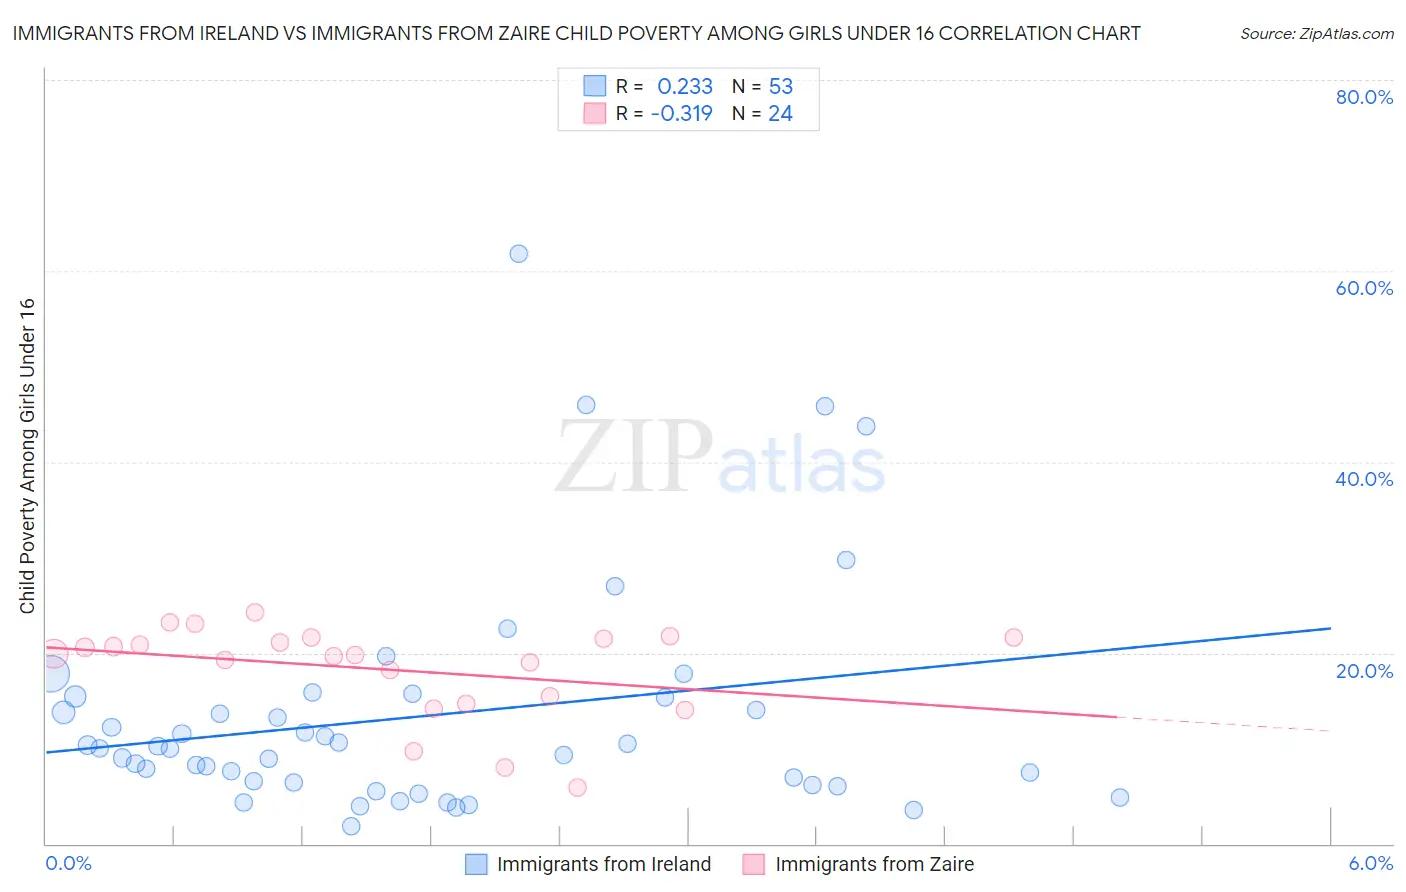 Immigrants from Ireland vs Immigrants from Zaire Child Poverty Among Girls Under 16